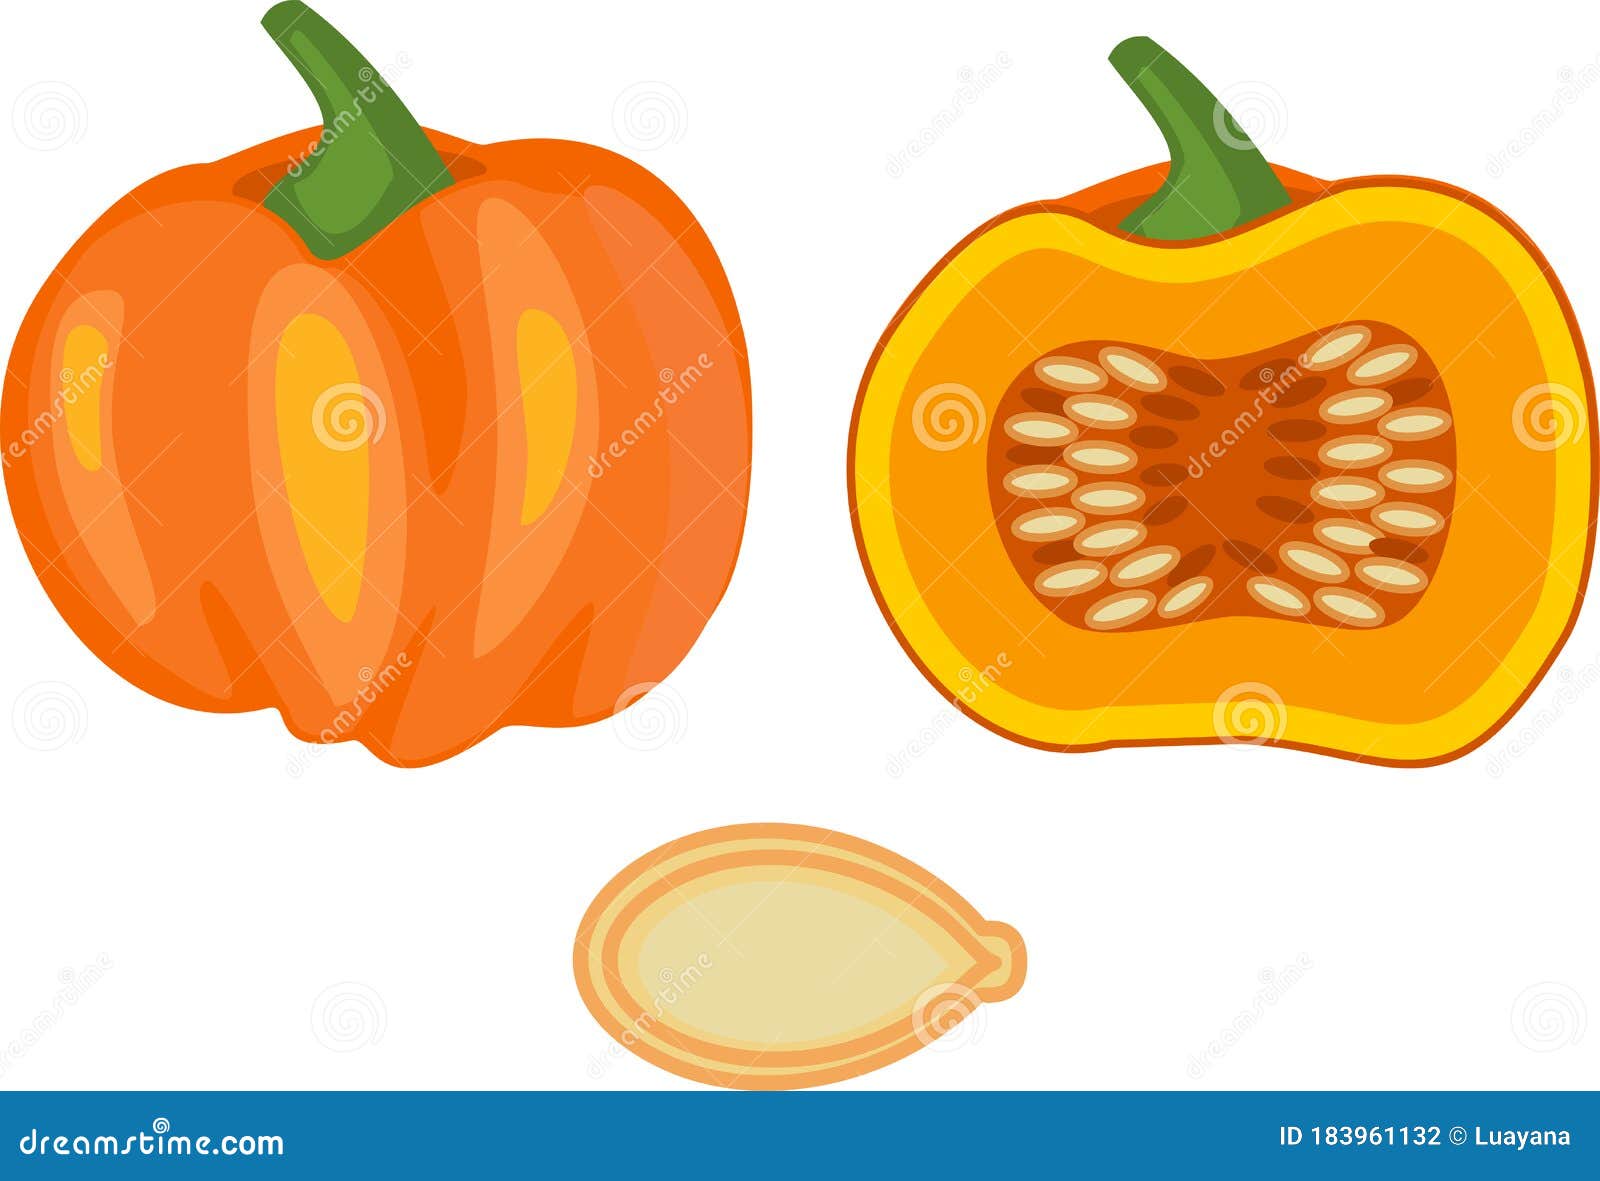 ripe pumpkin, whole and in longitudinal section